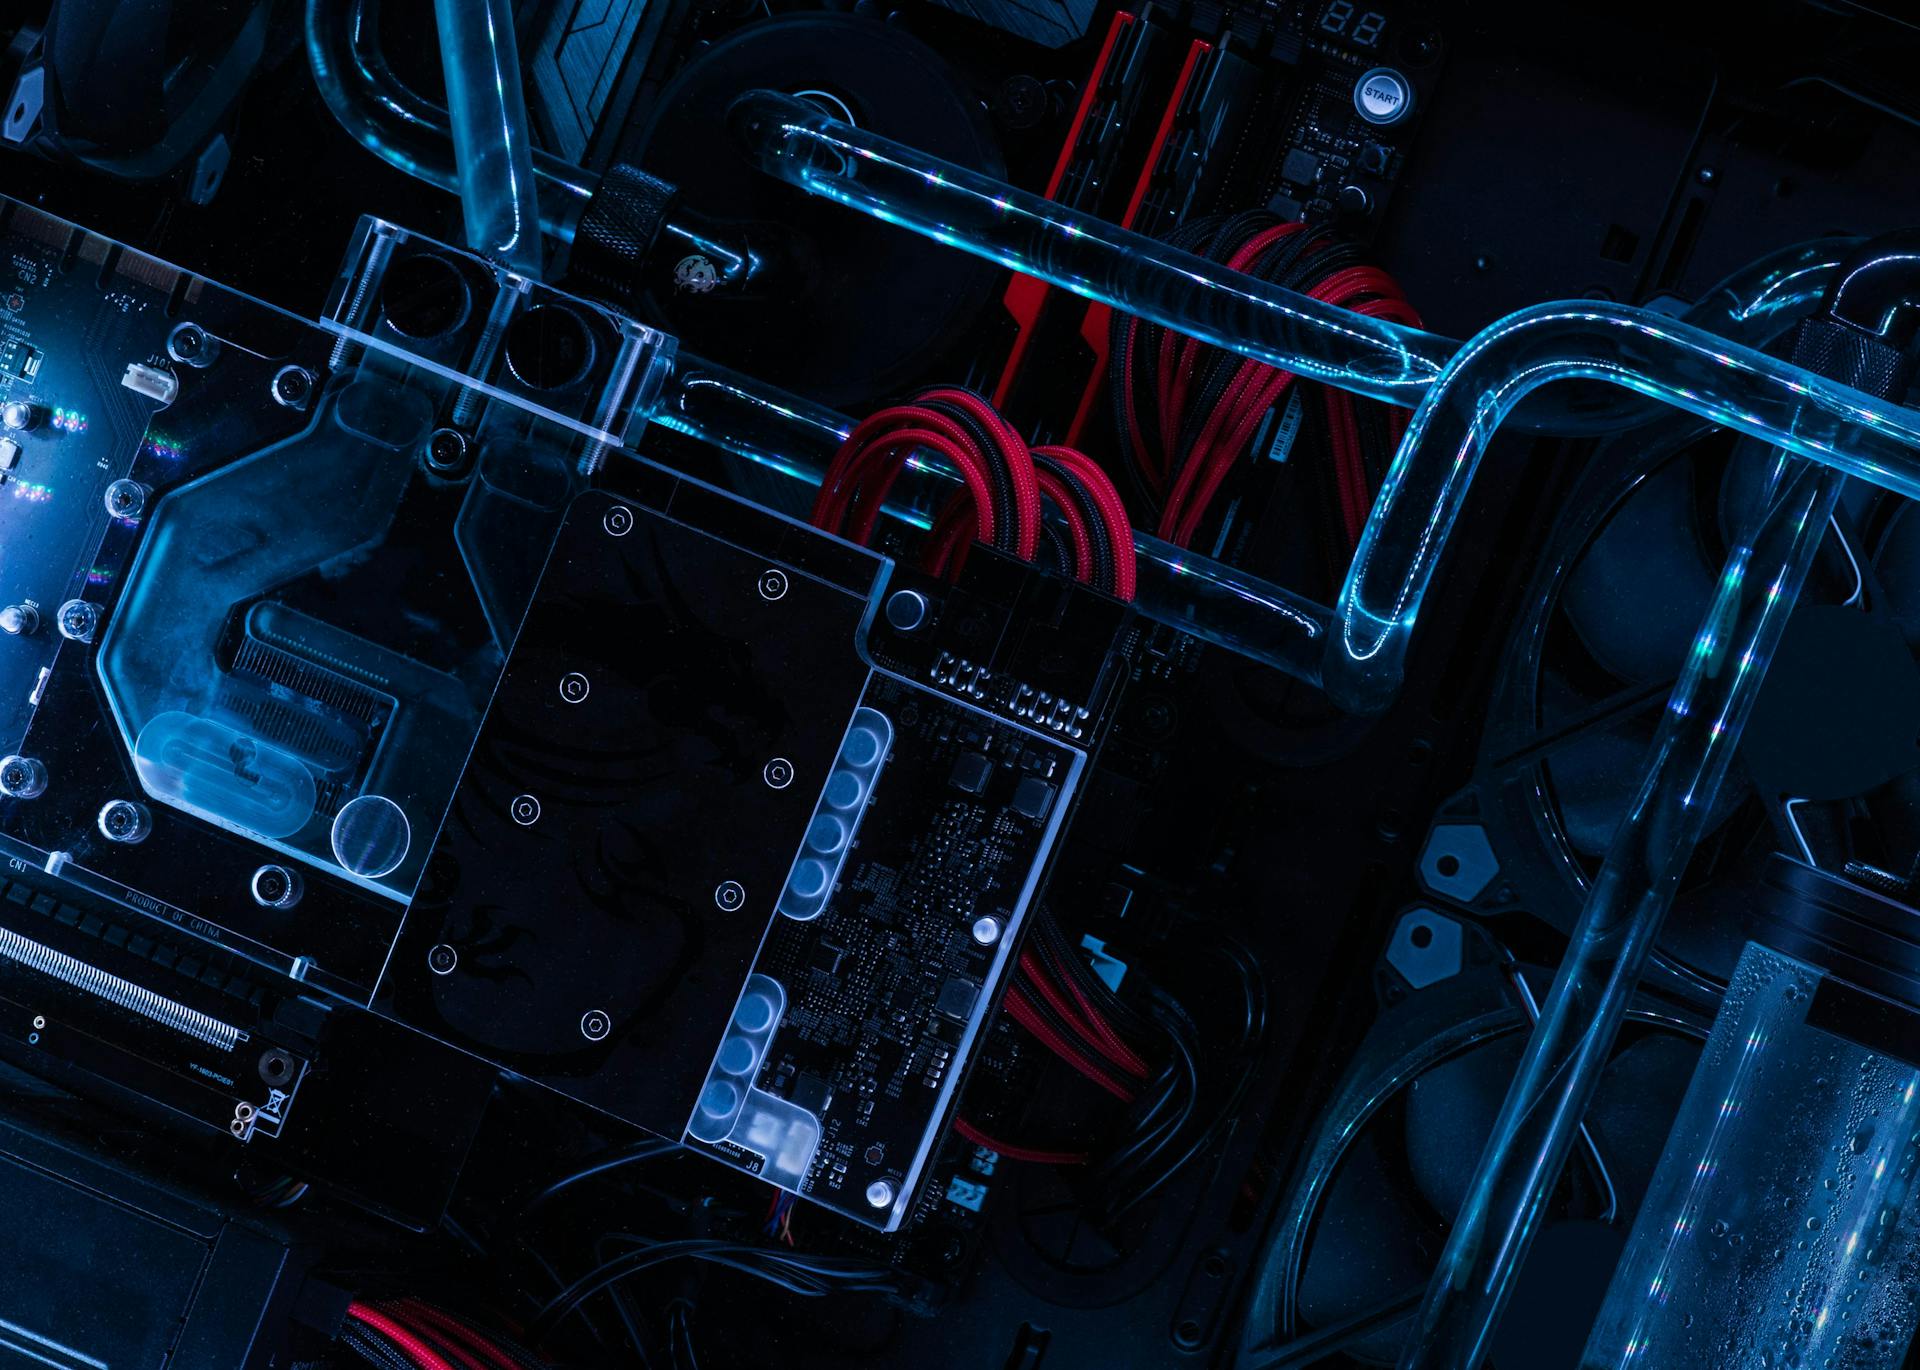 News - How To Maintain a Liquid Cooled PC – Fluidgaming